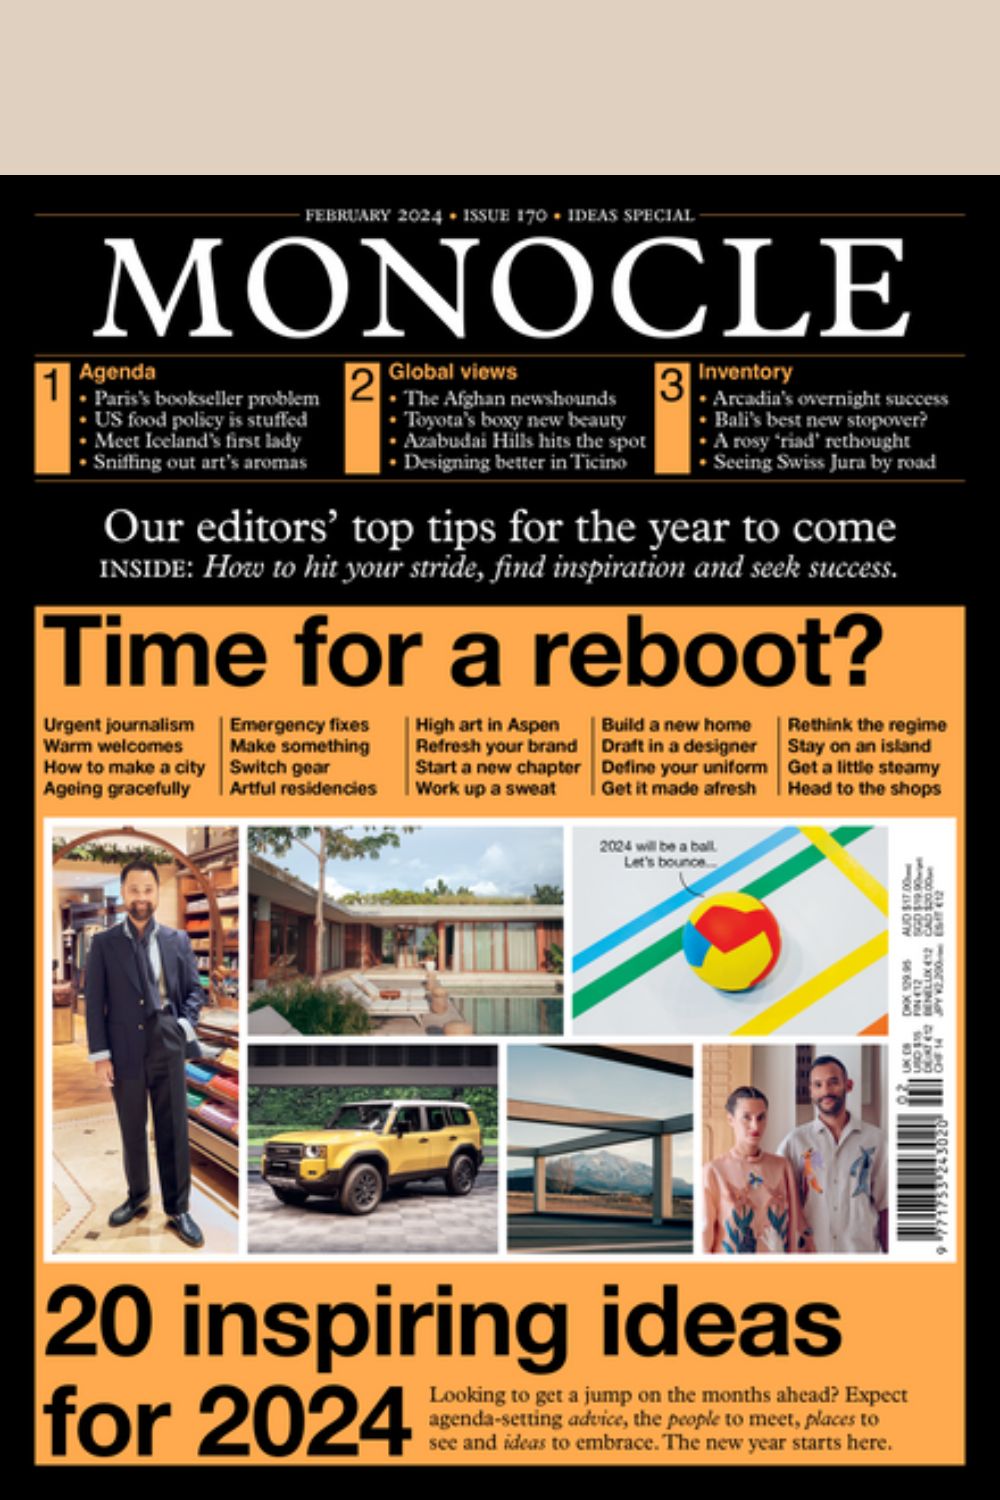 Monocle Magazine Issue 170 cover